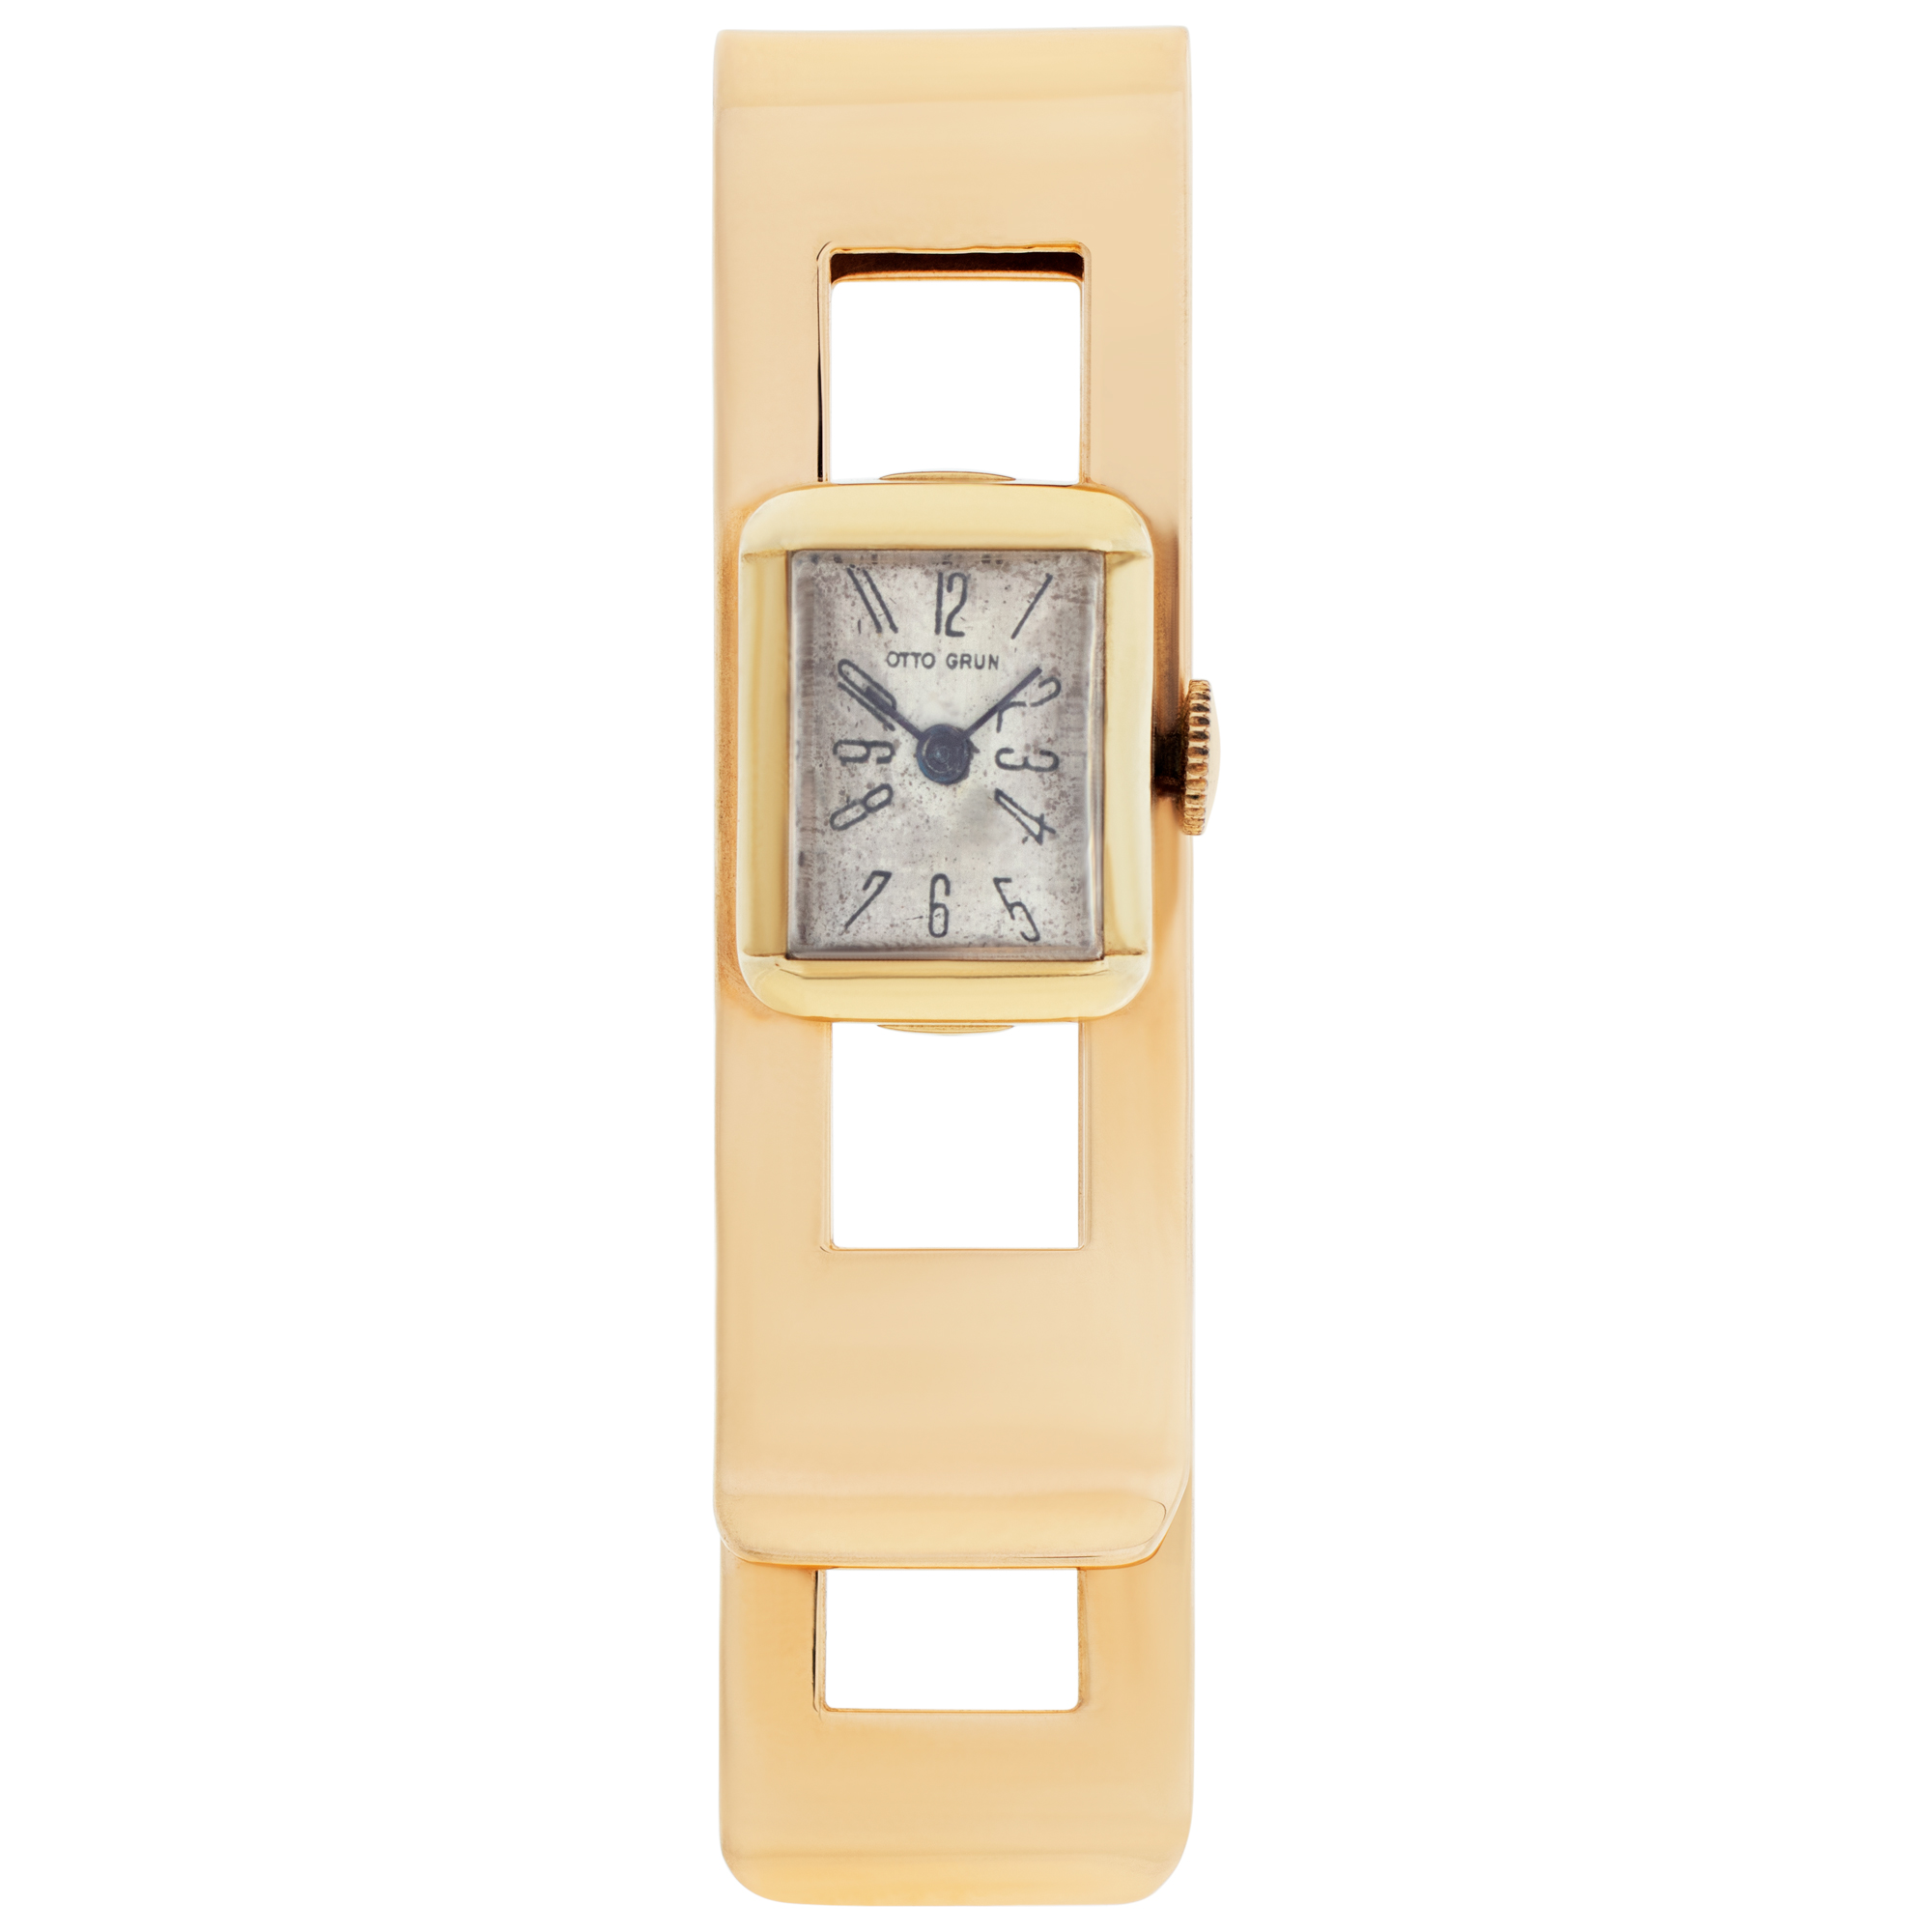 Money Clip in 14k yellow gold with Otto Grun watch image 1